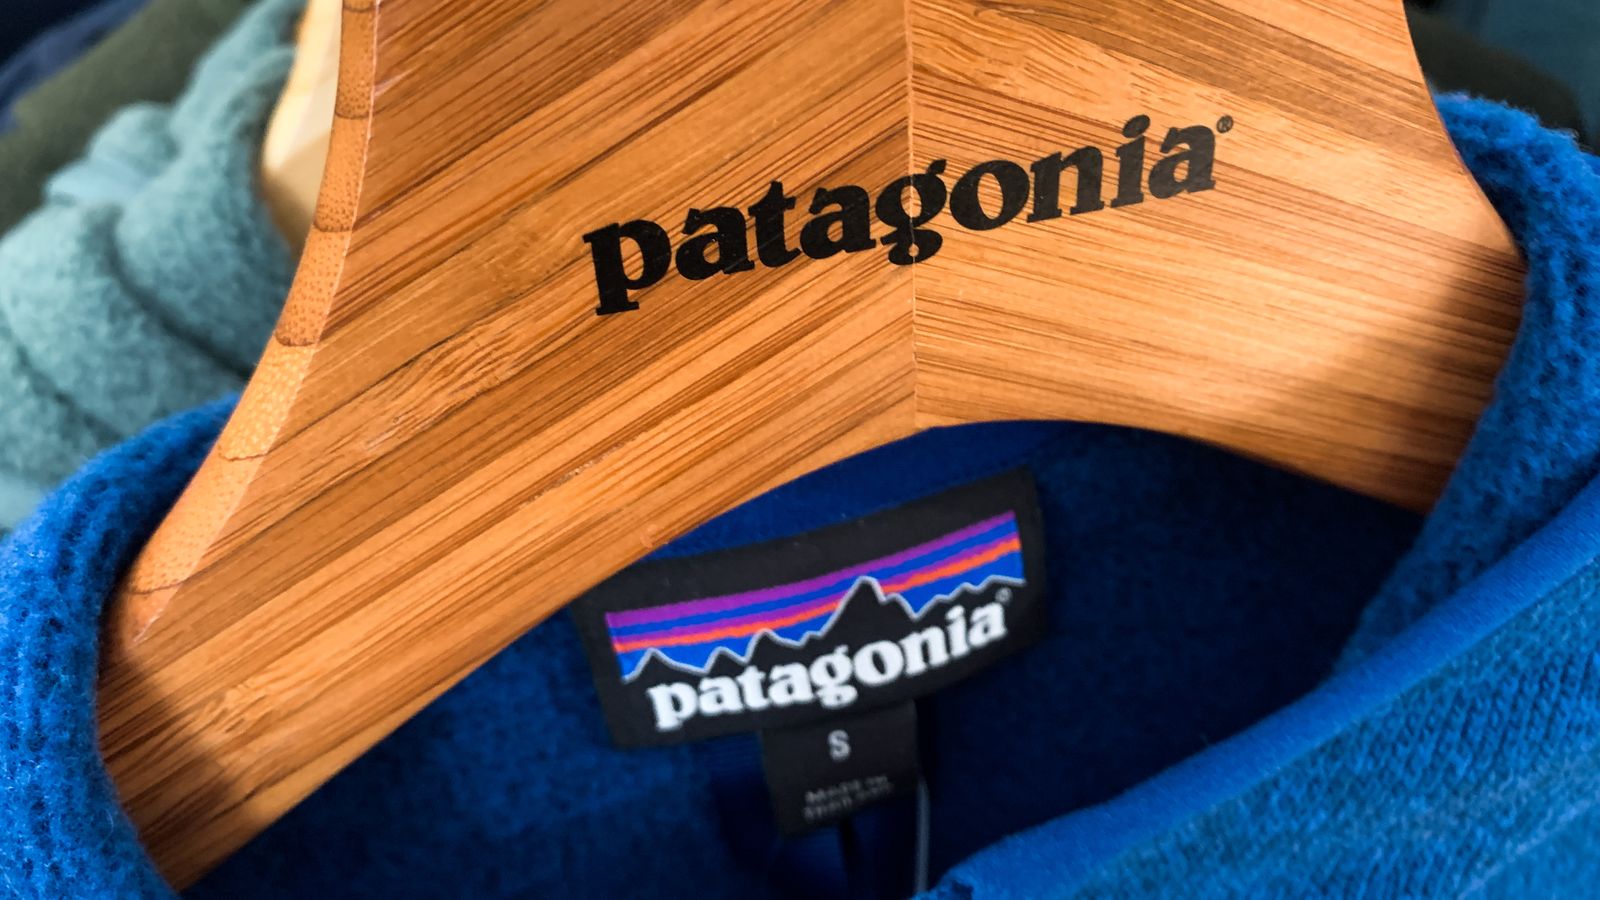 Patagonia's valuation likely more than $4.5B